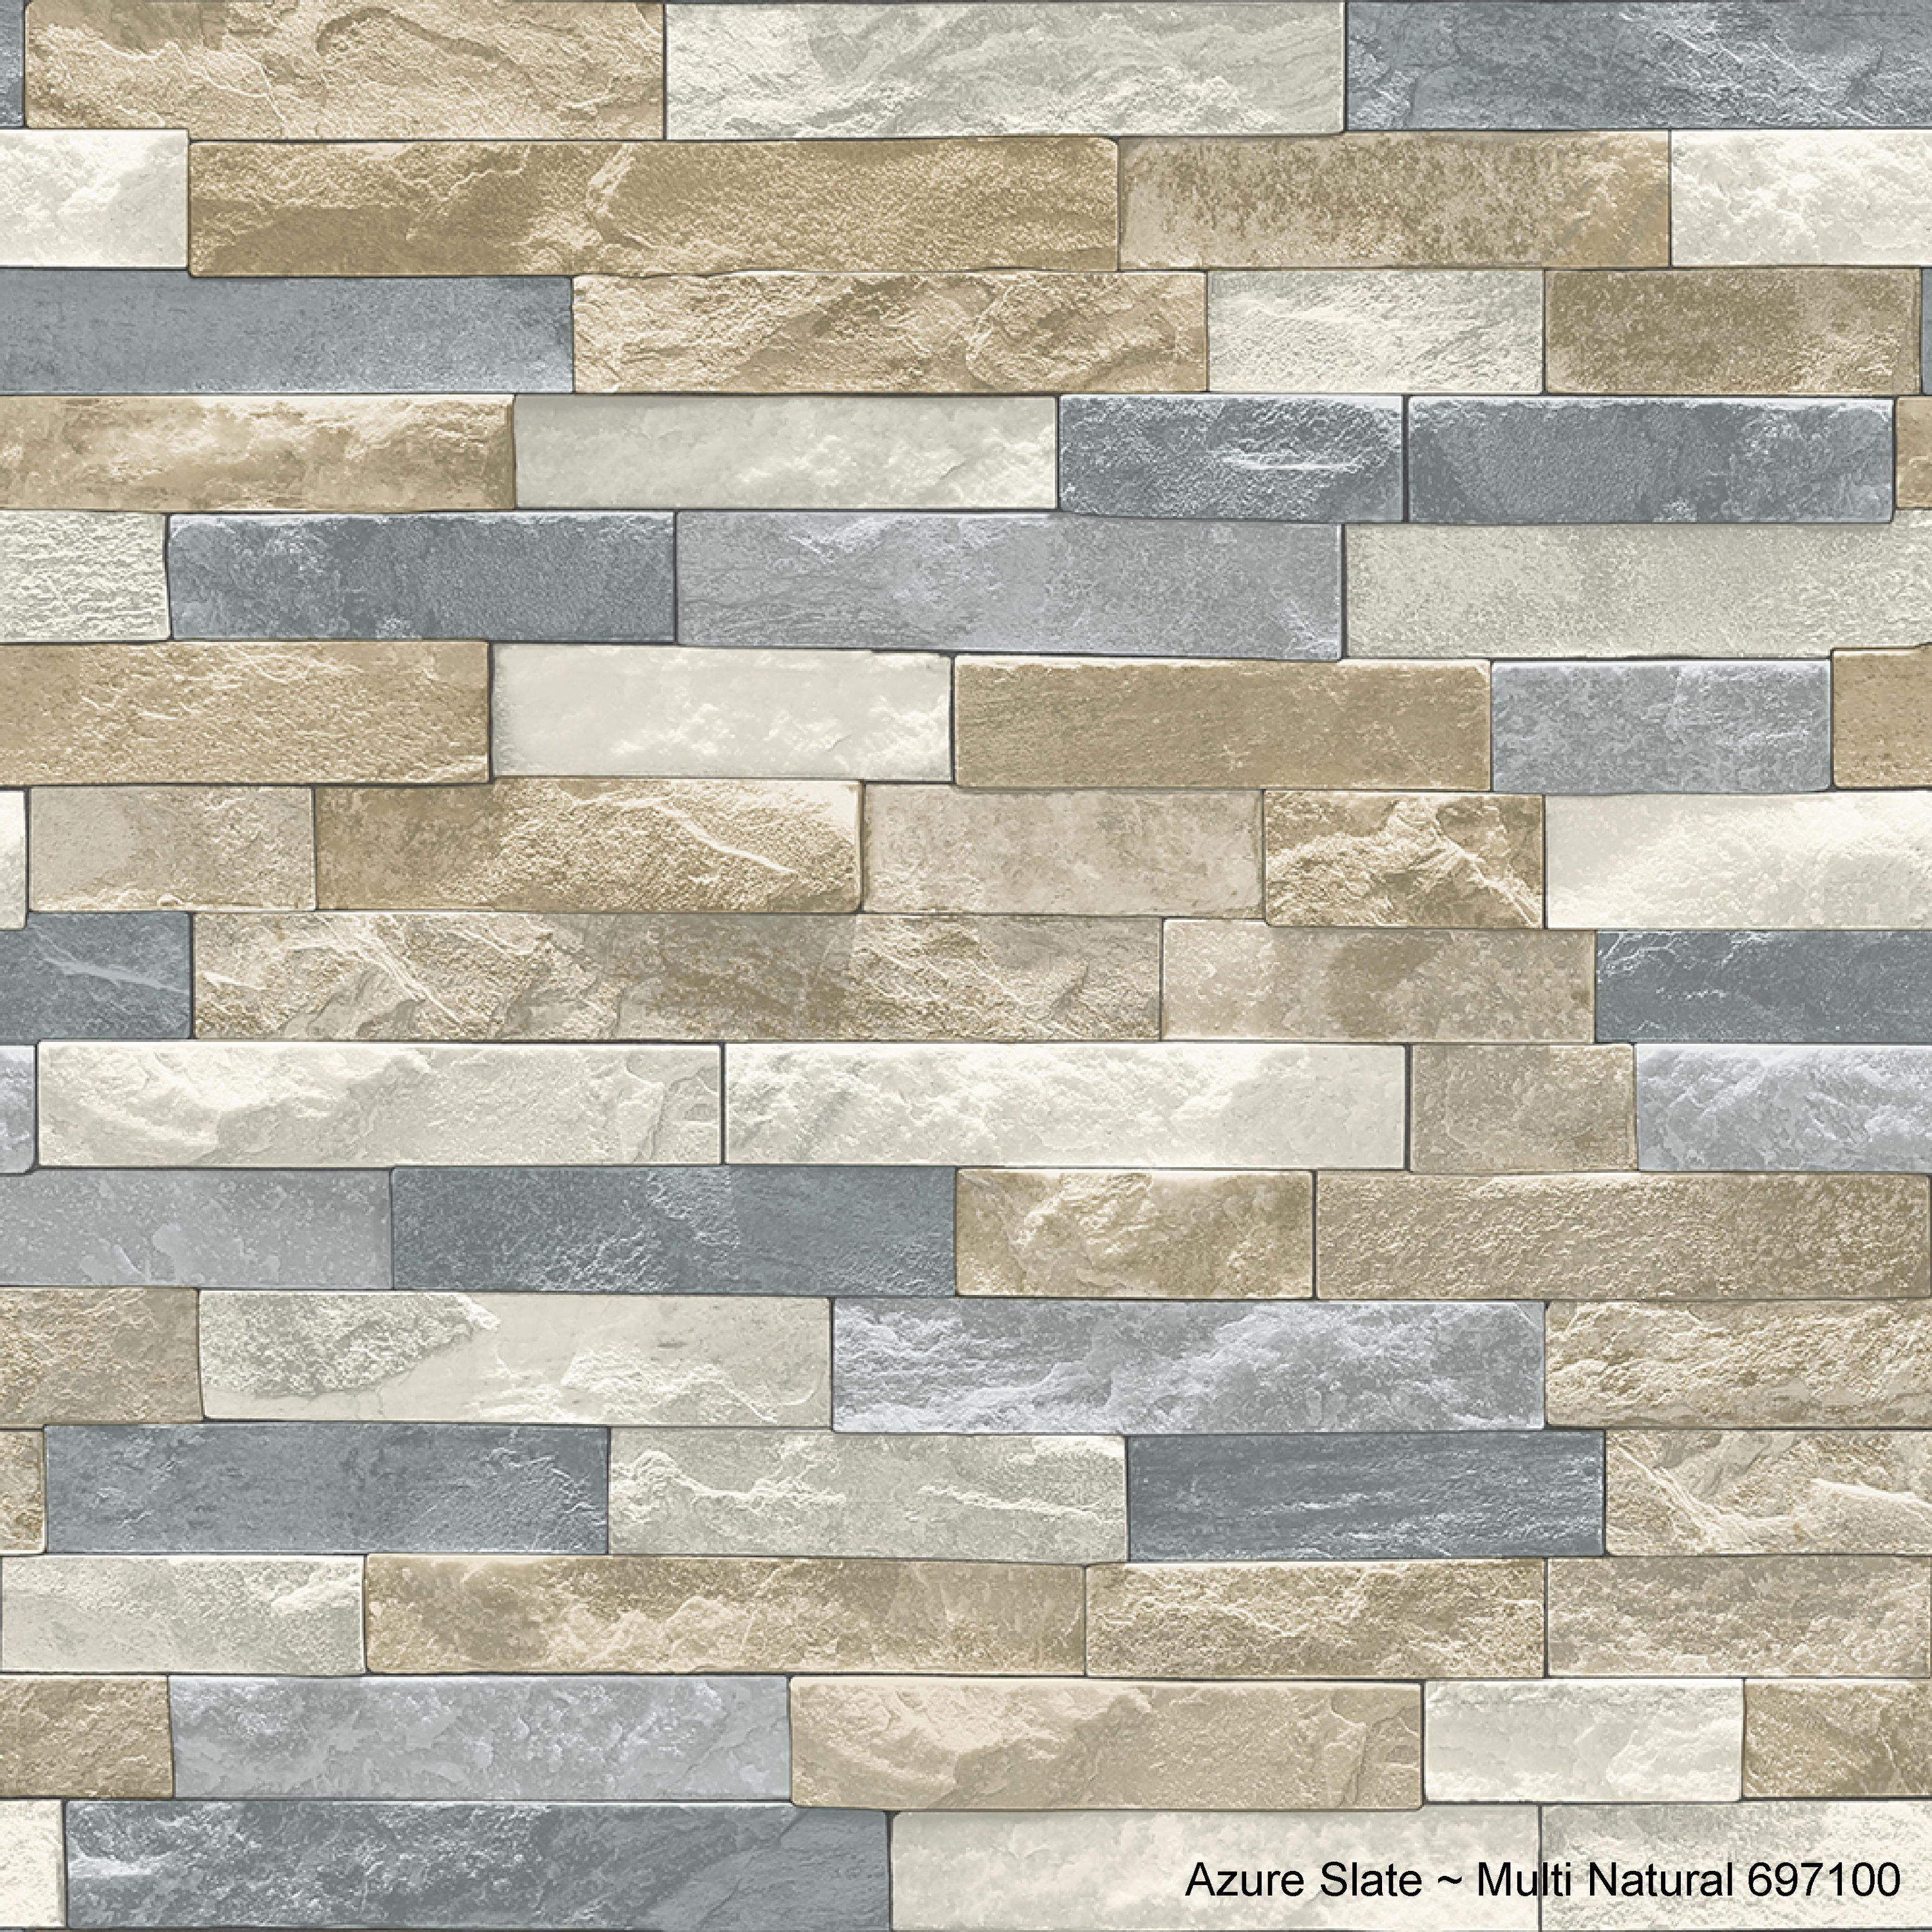 Wallpaper textured brown white modern faux realistic sandstone stone texture 3D 